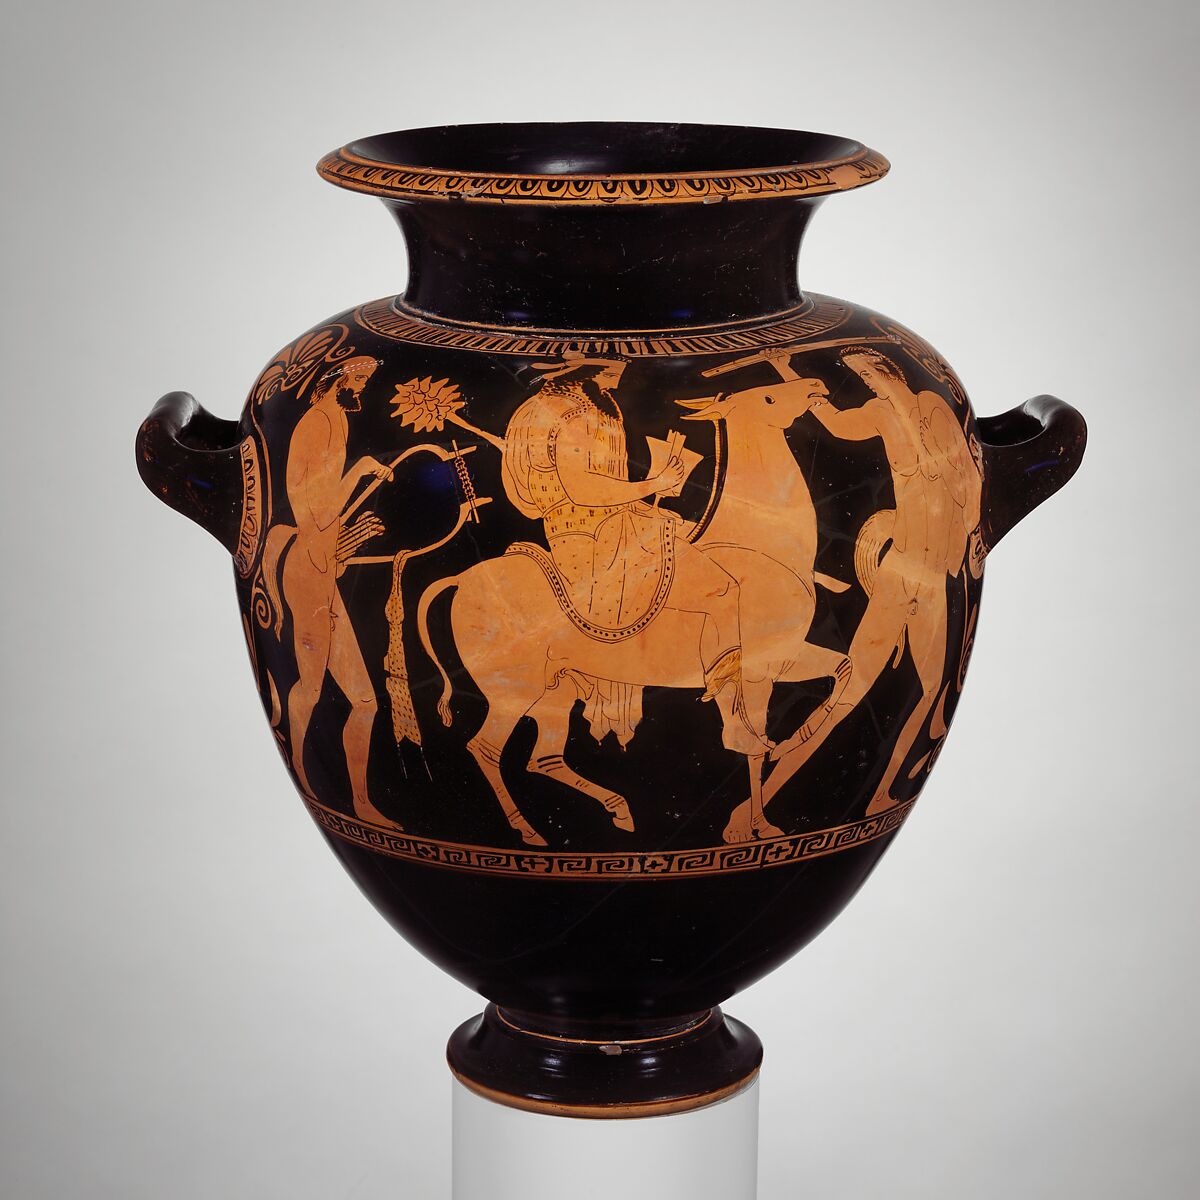 Terracotta stamnos (jar), Attributed to a Painter in the Group of Polygnotos, Terracotta, Greek, Attic 